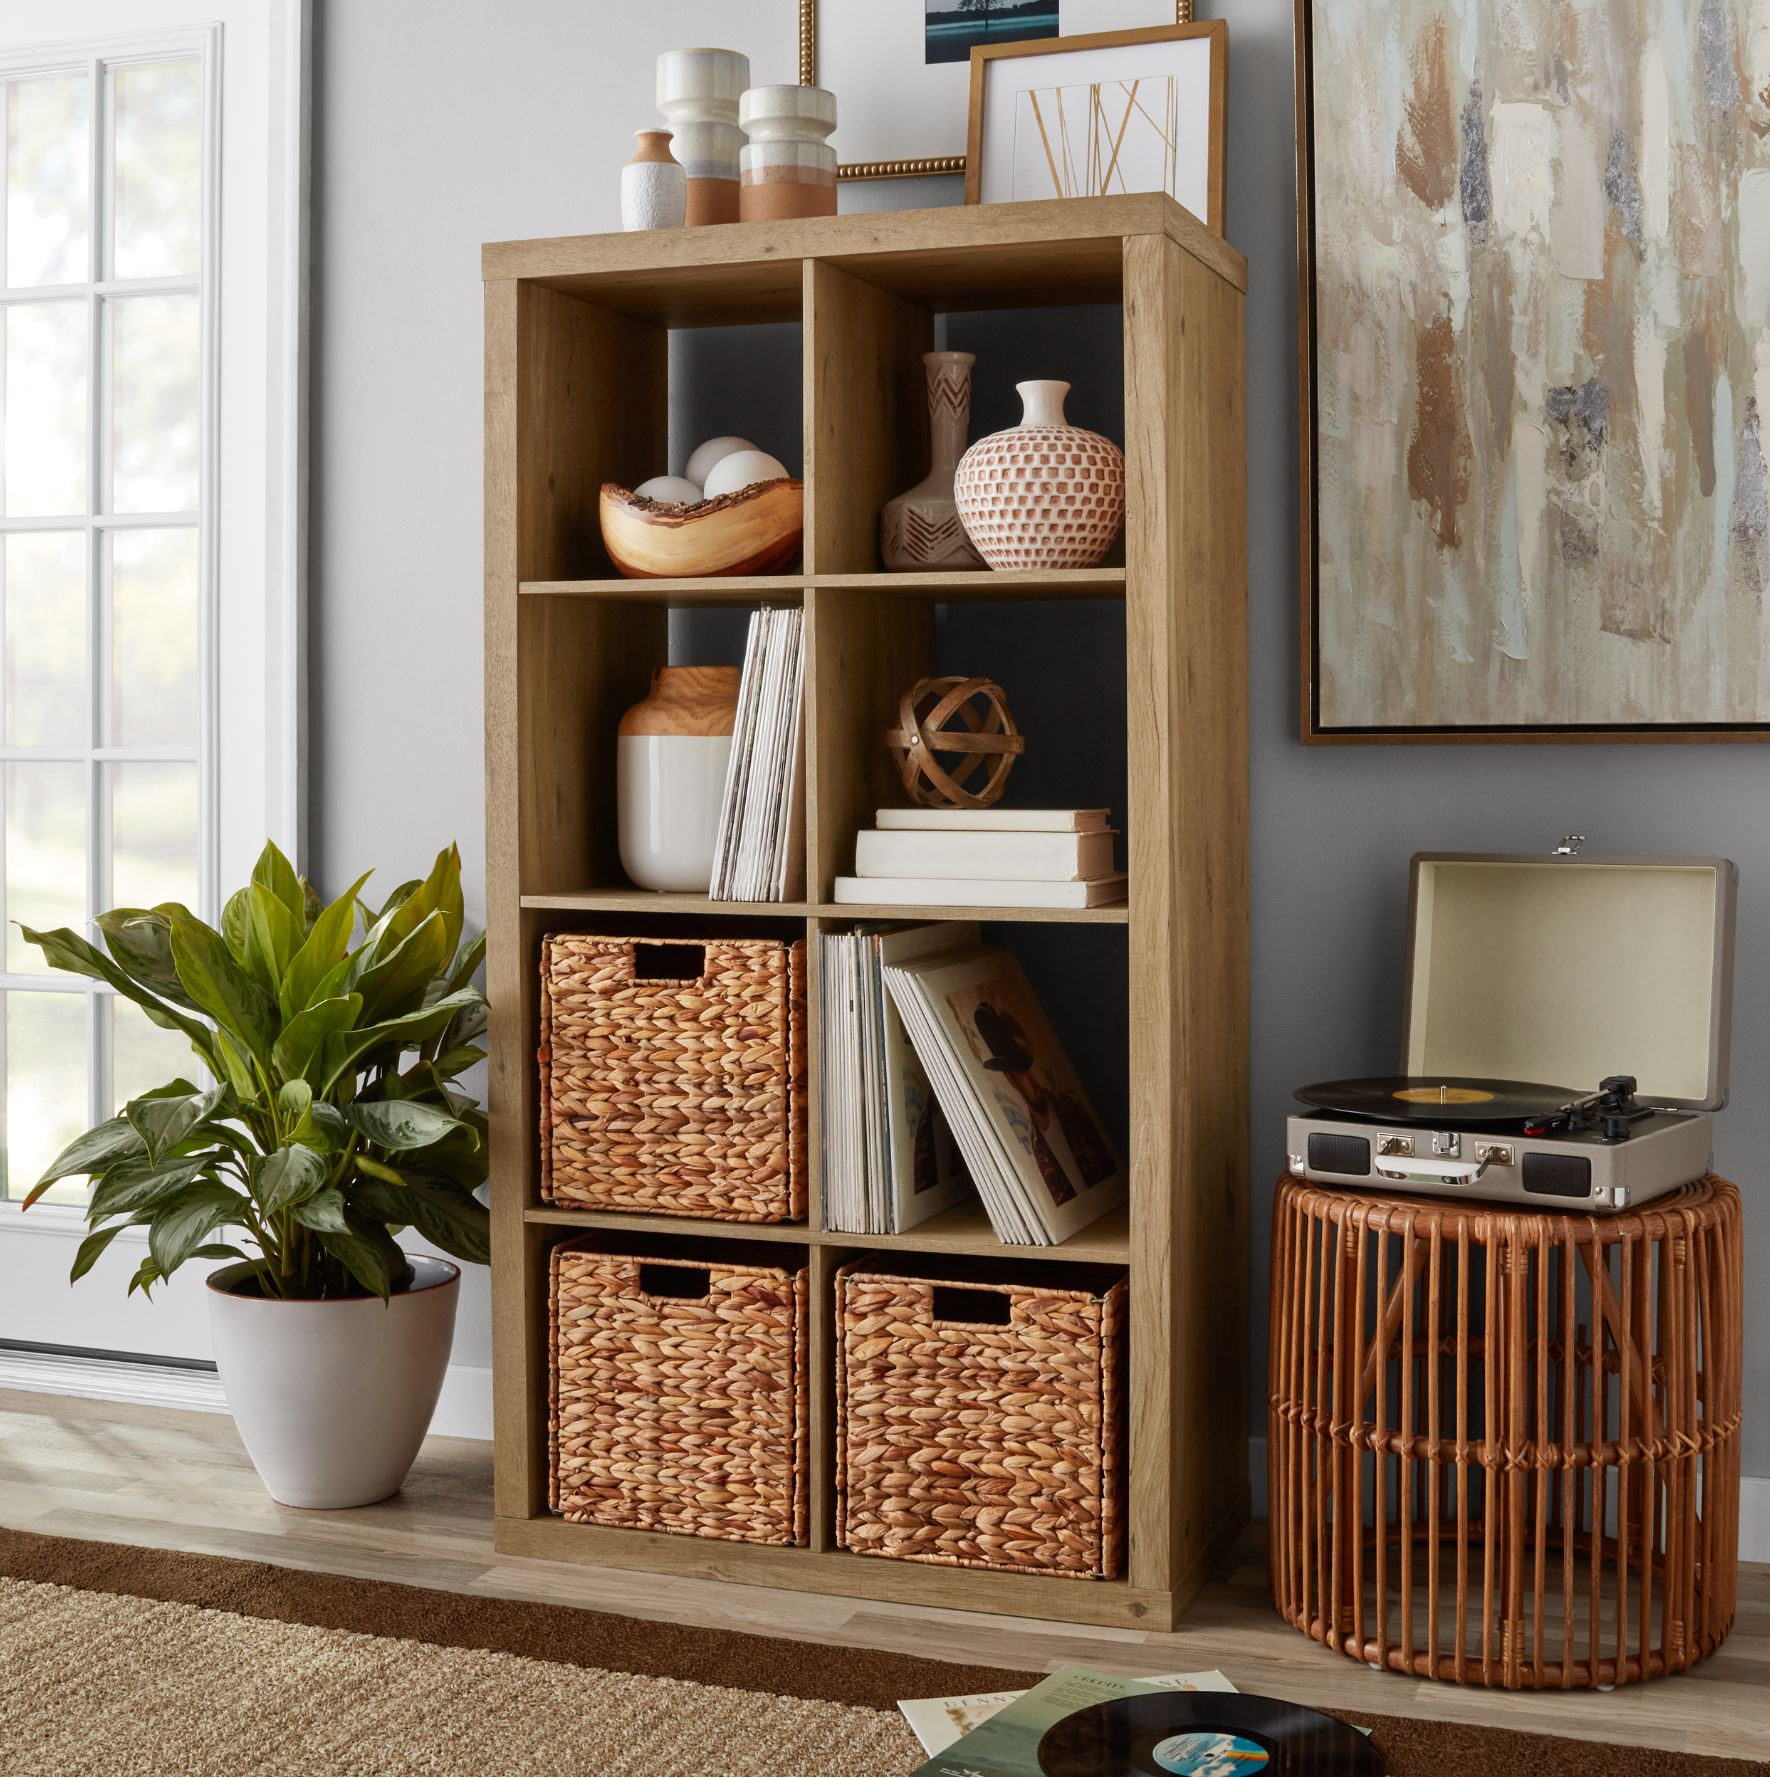 Better Homes & Gardens 8-Cube Storage Organizer, Natural - image 3 of 8